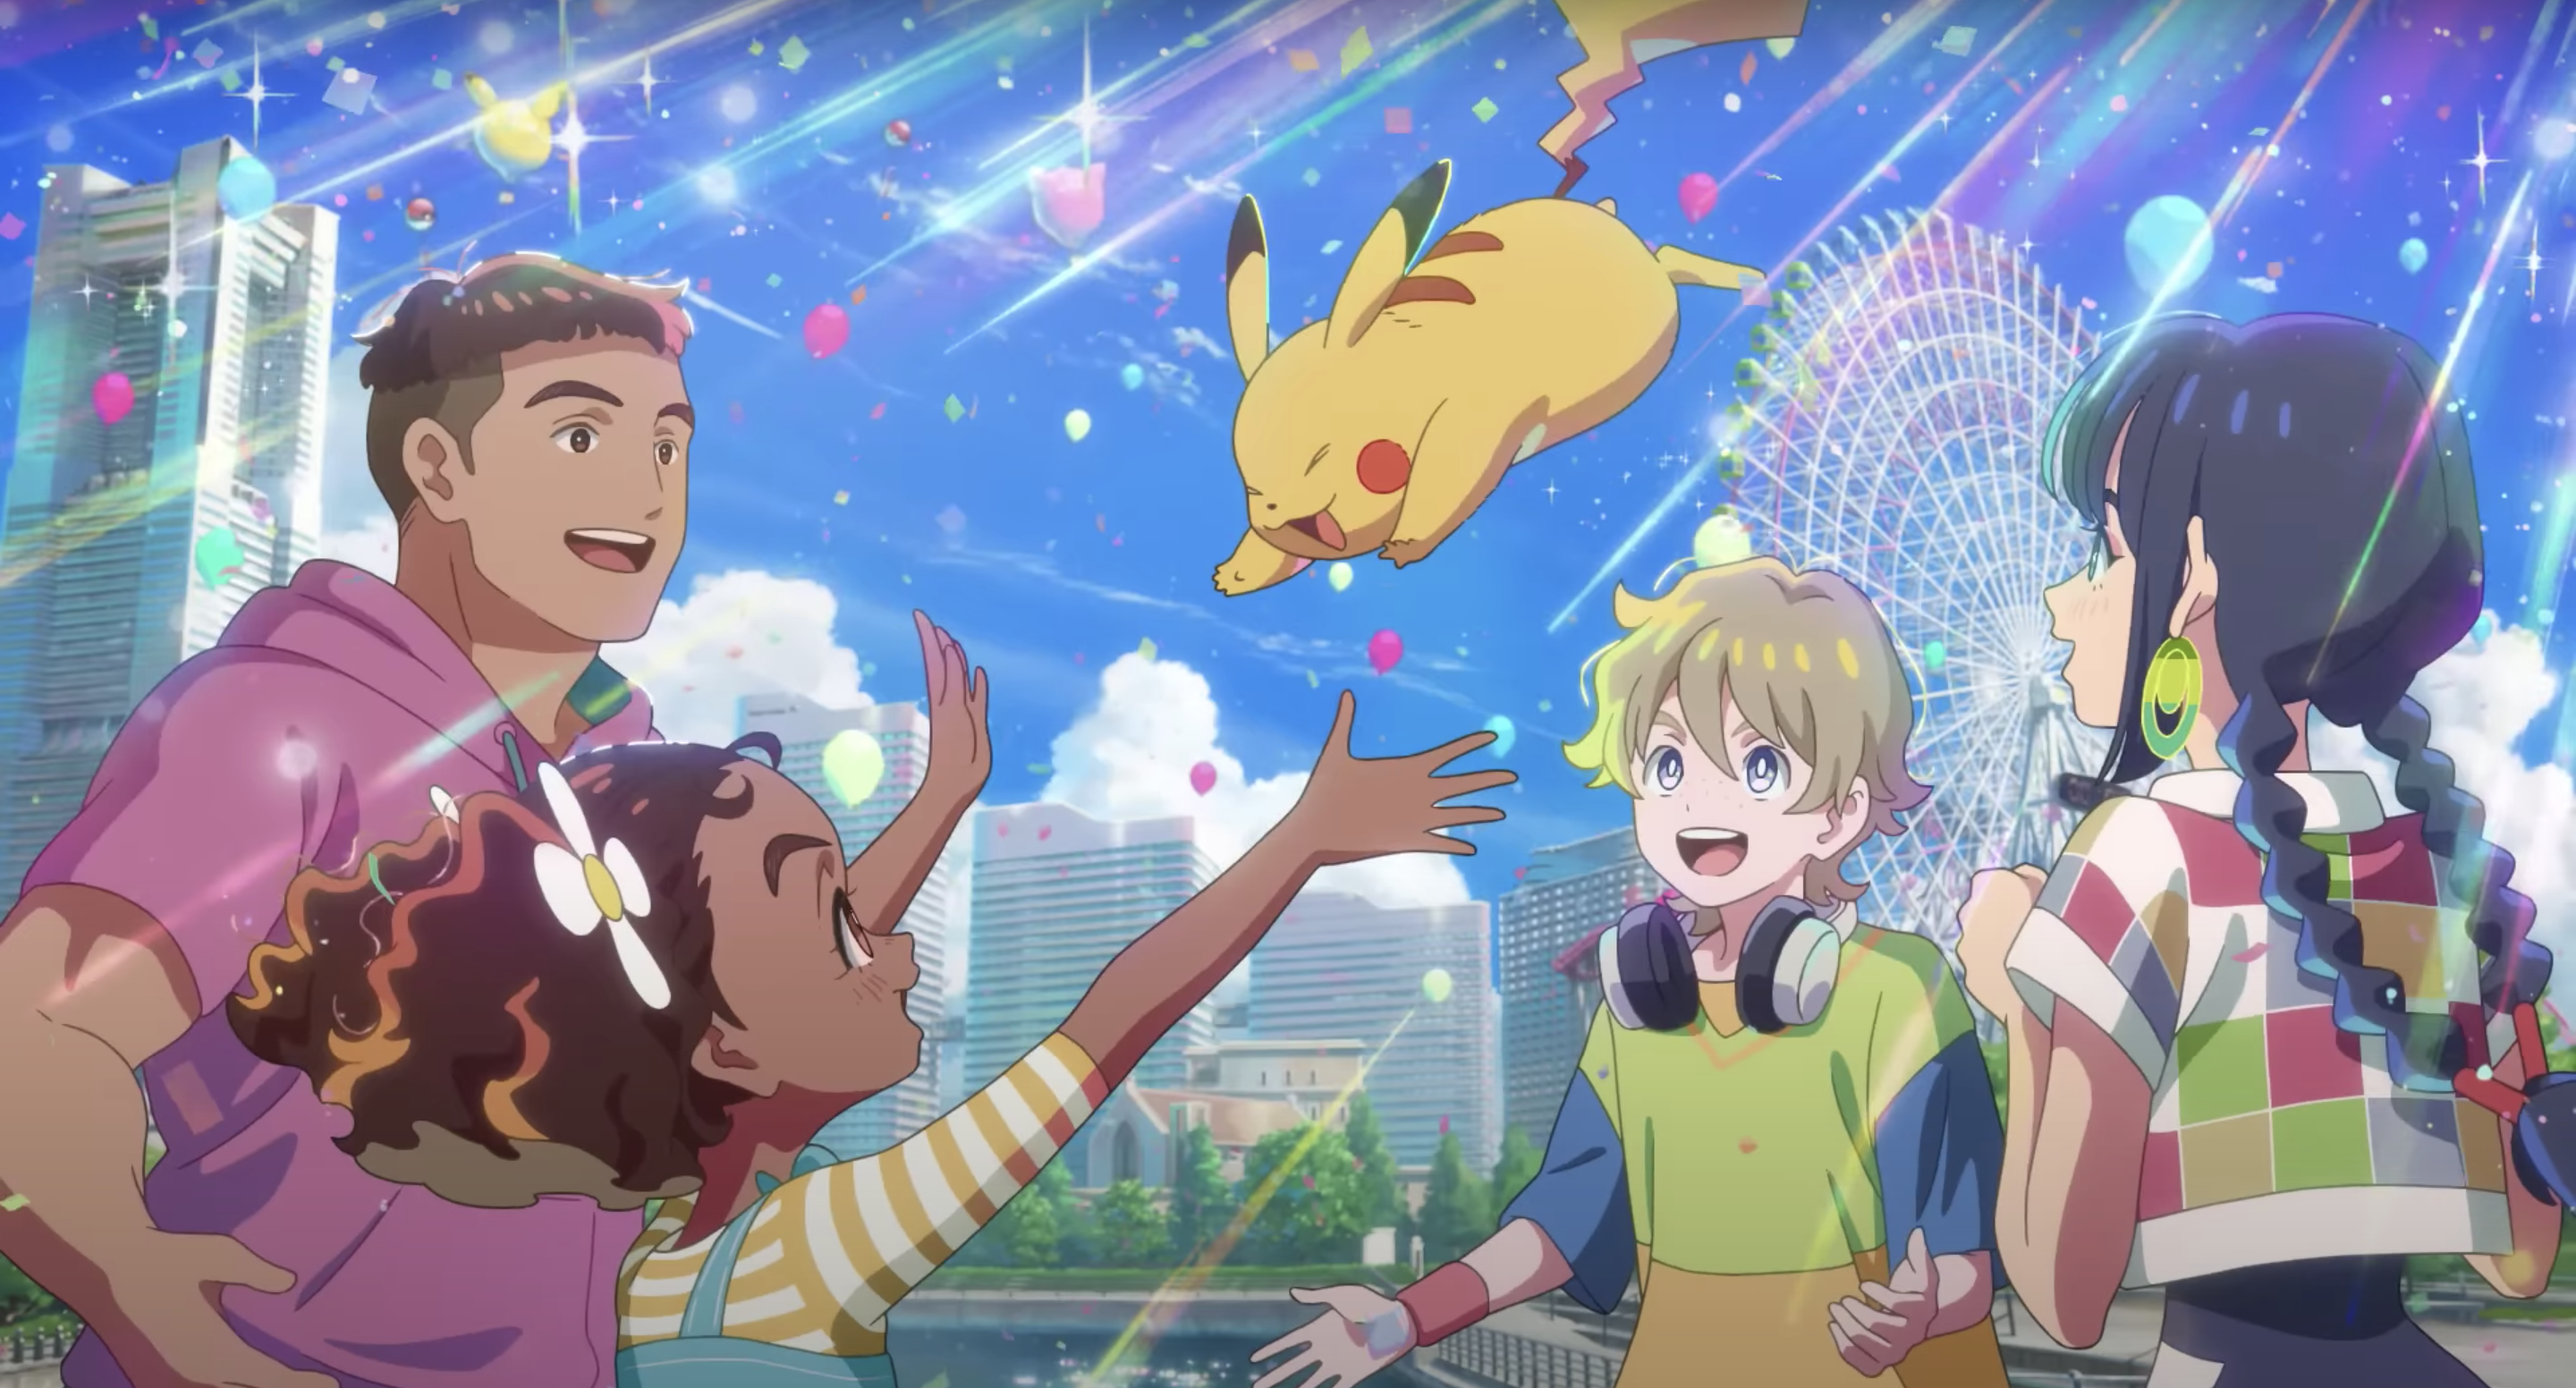 Beautiful Anime Video from Your Name Studio Releases for Pokemon